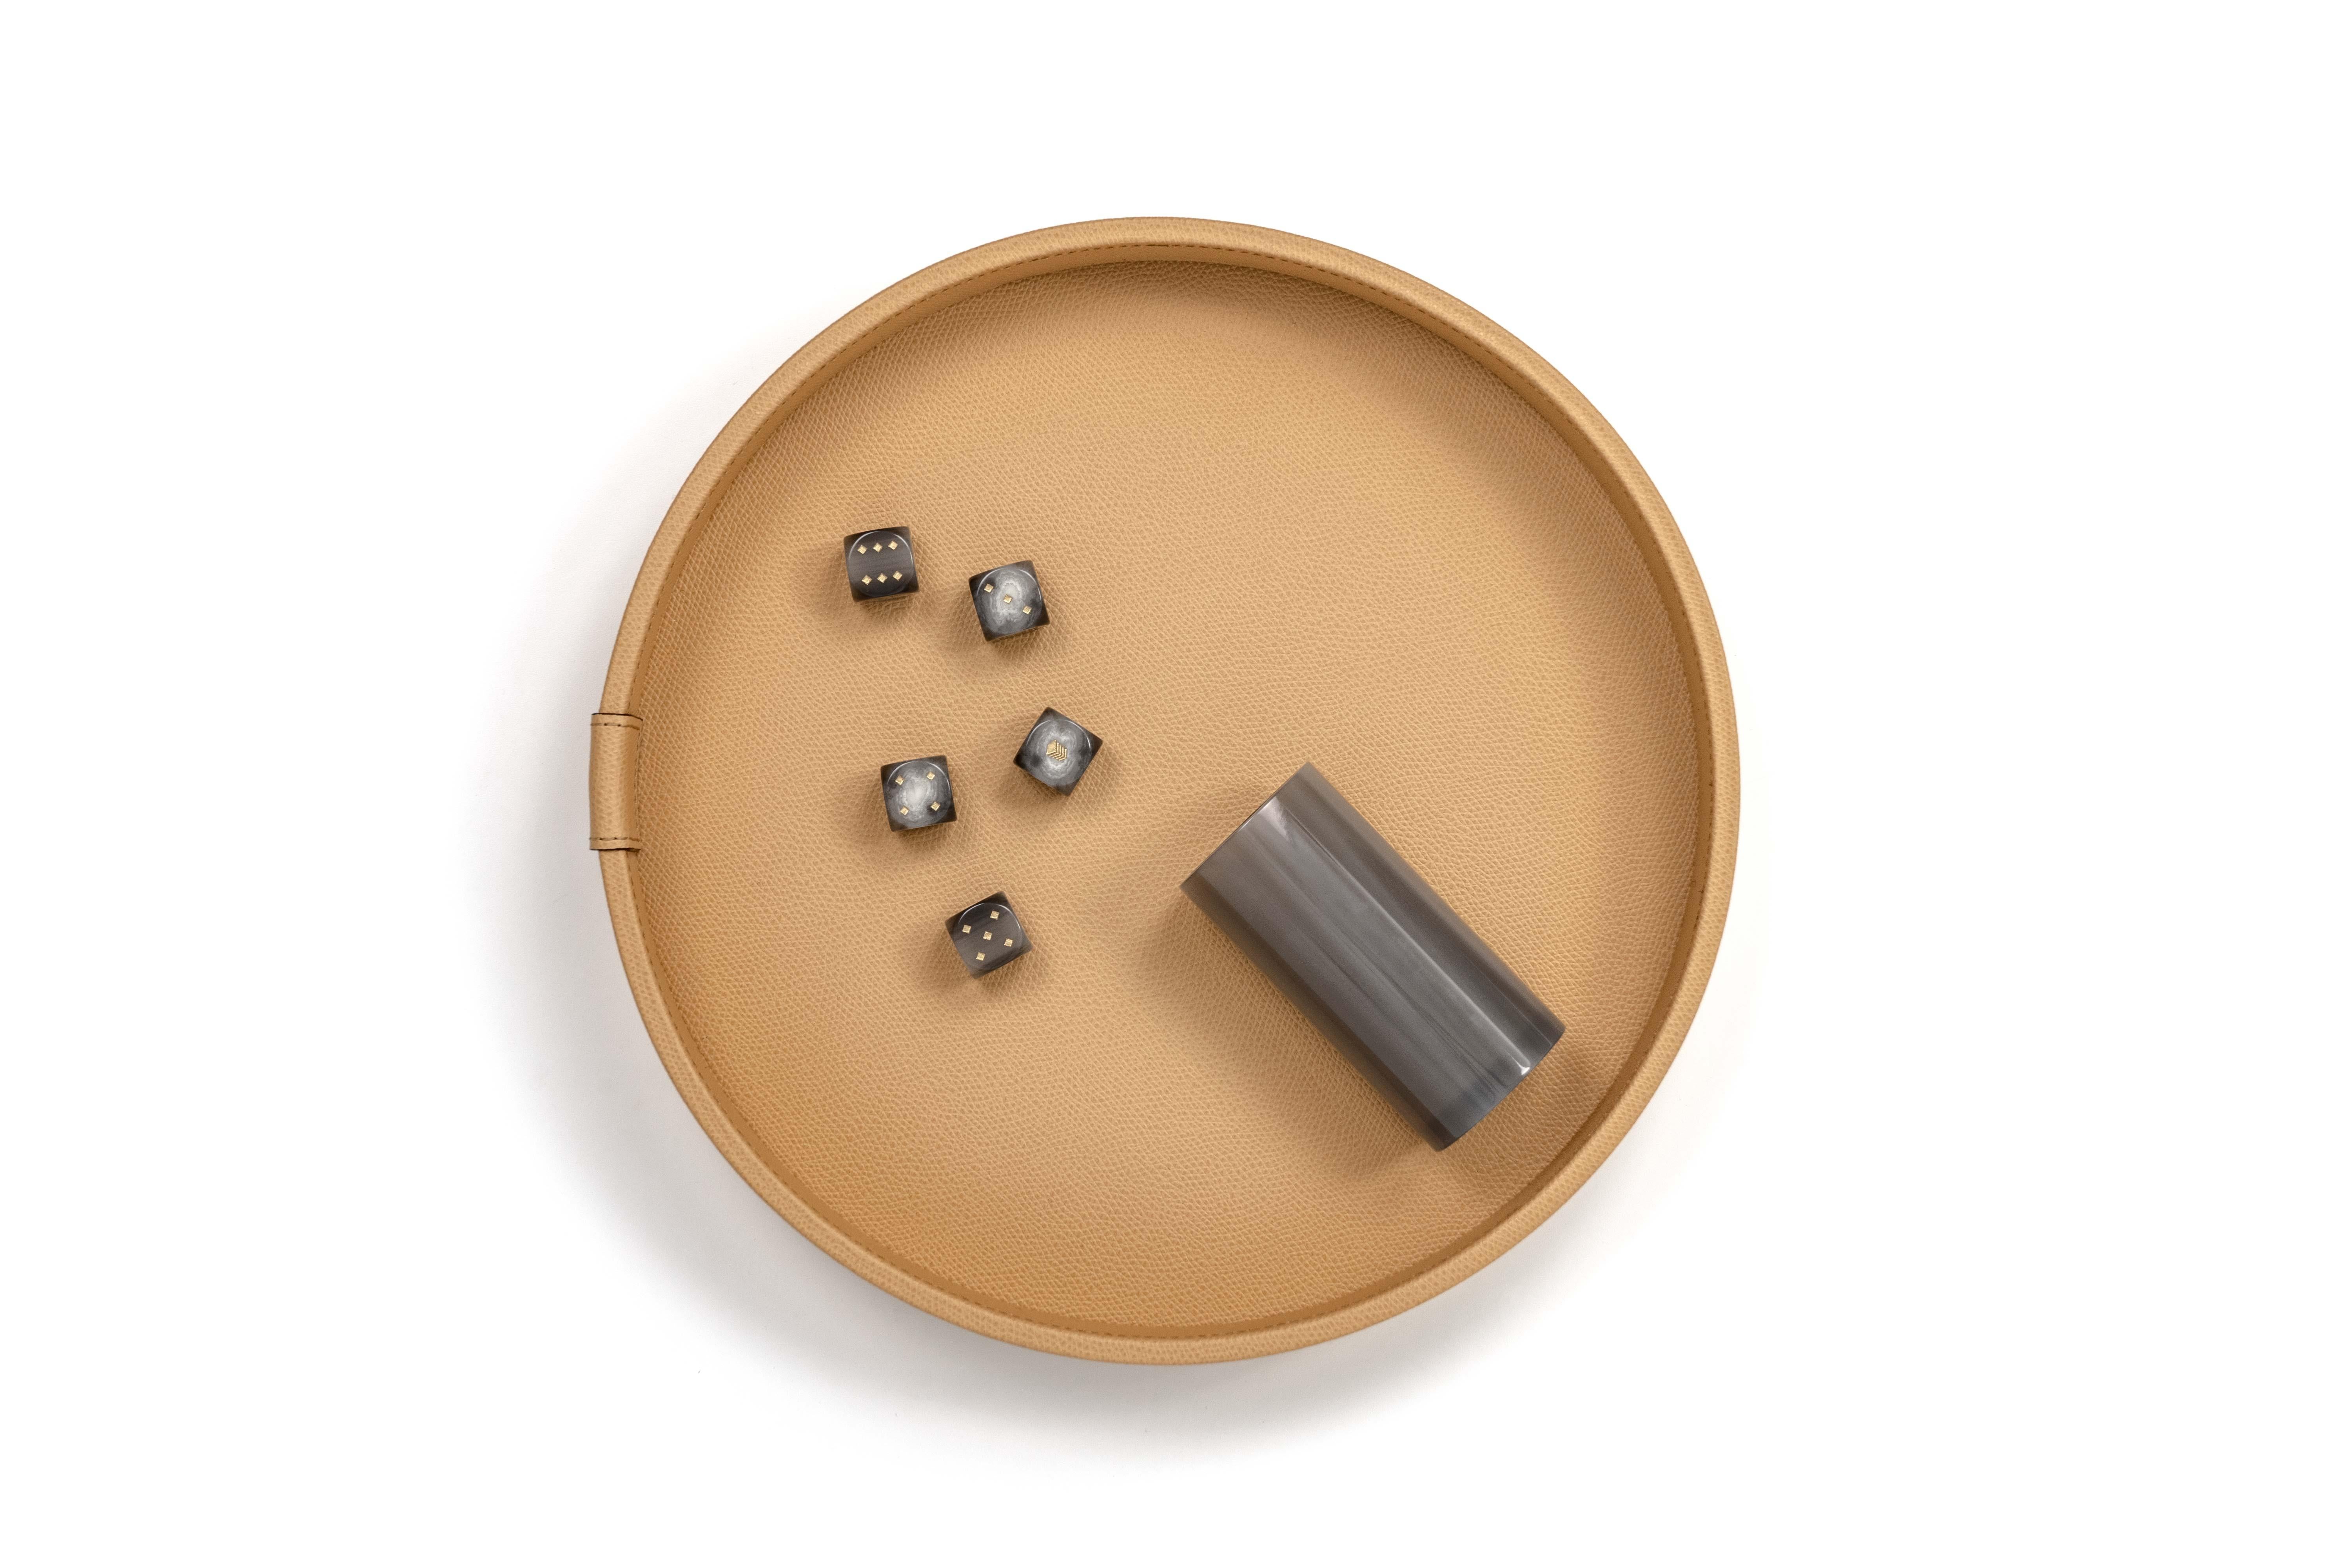 The essential design of our Gea round tray made with waterproof and scratch calf skin leather with non-slip base meet Pinetti leisure collection reinventing one of the oldest board games. 

With the addition of  one shaker and 5 Pinetti customized